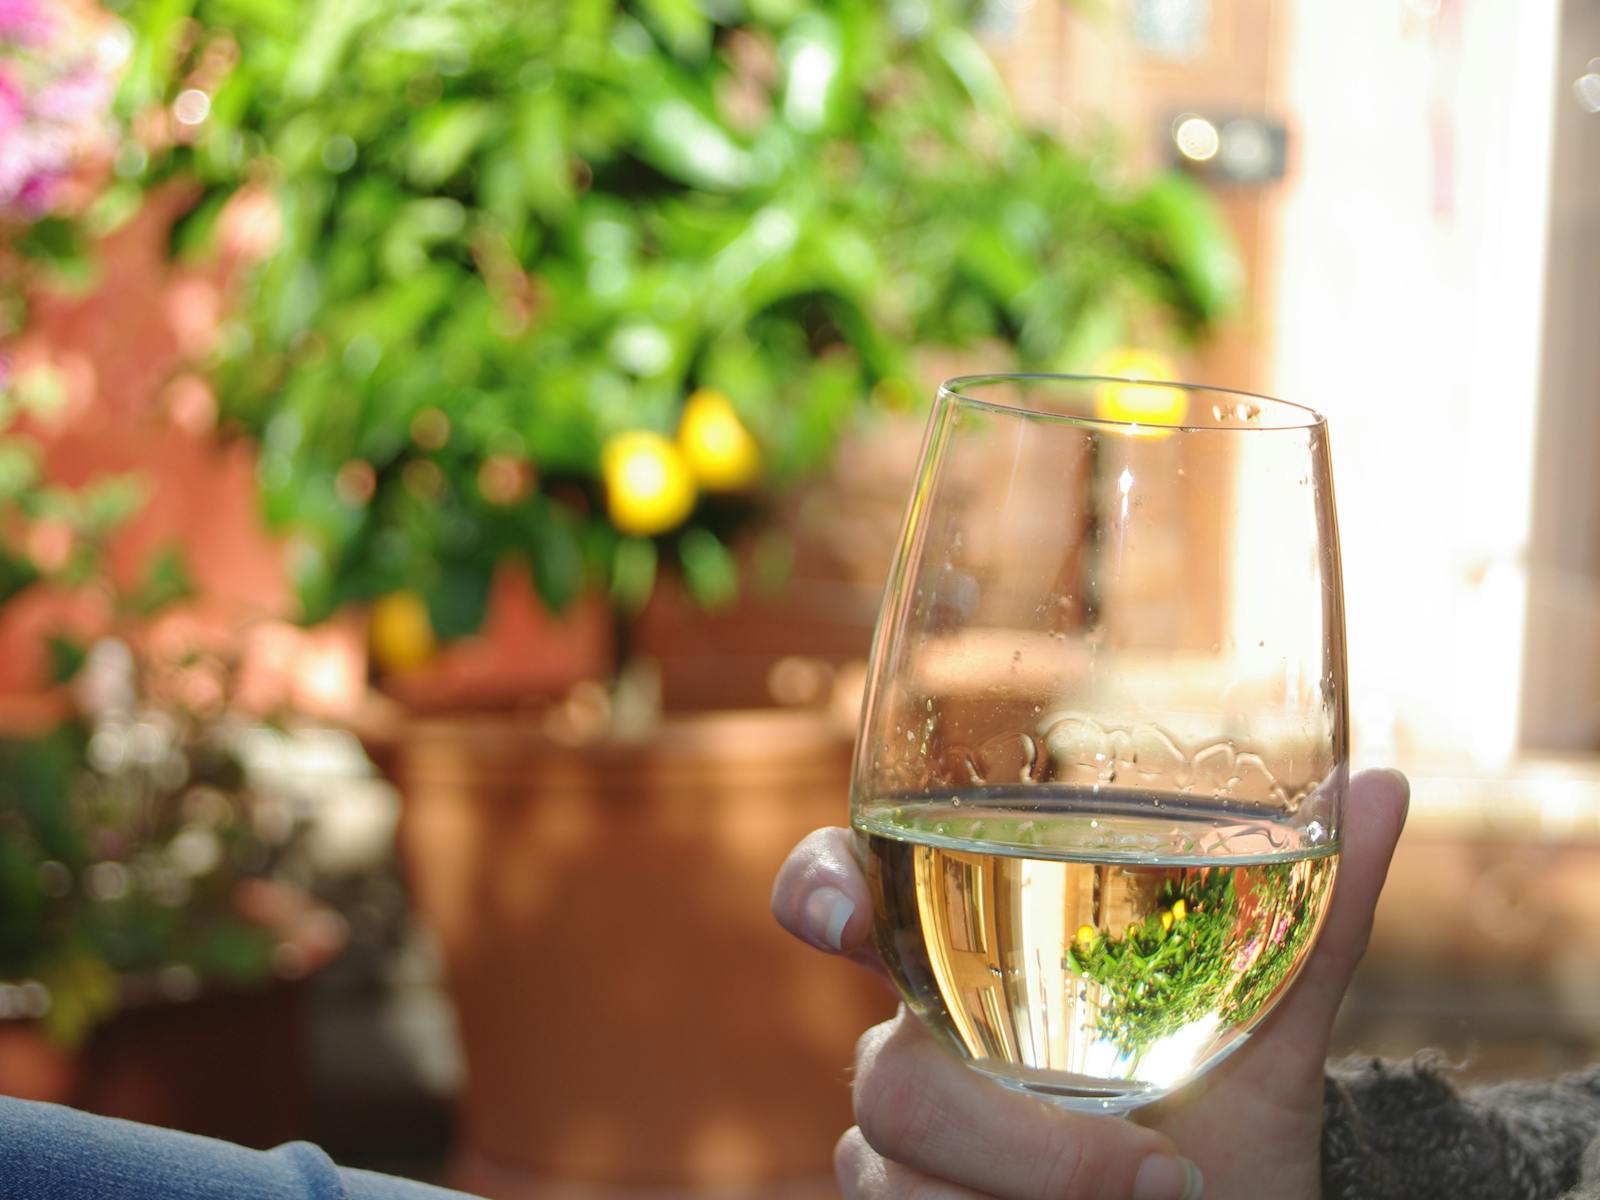 Enjoy a glass of wine in the sun drenched  courtyard